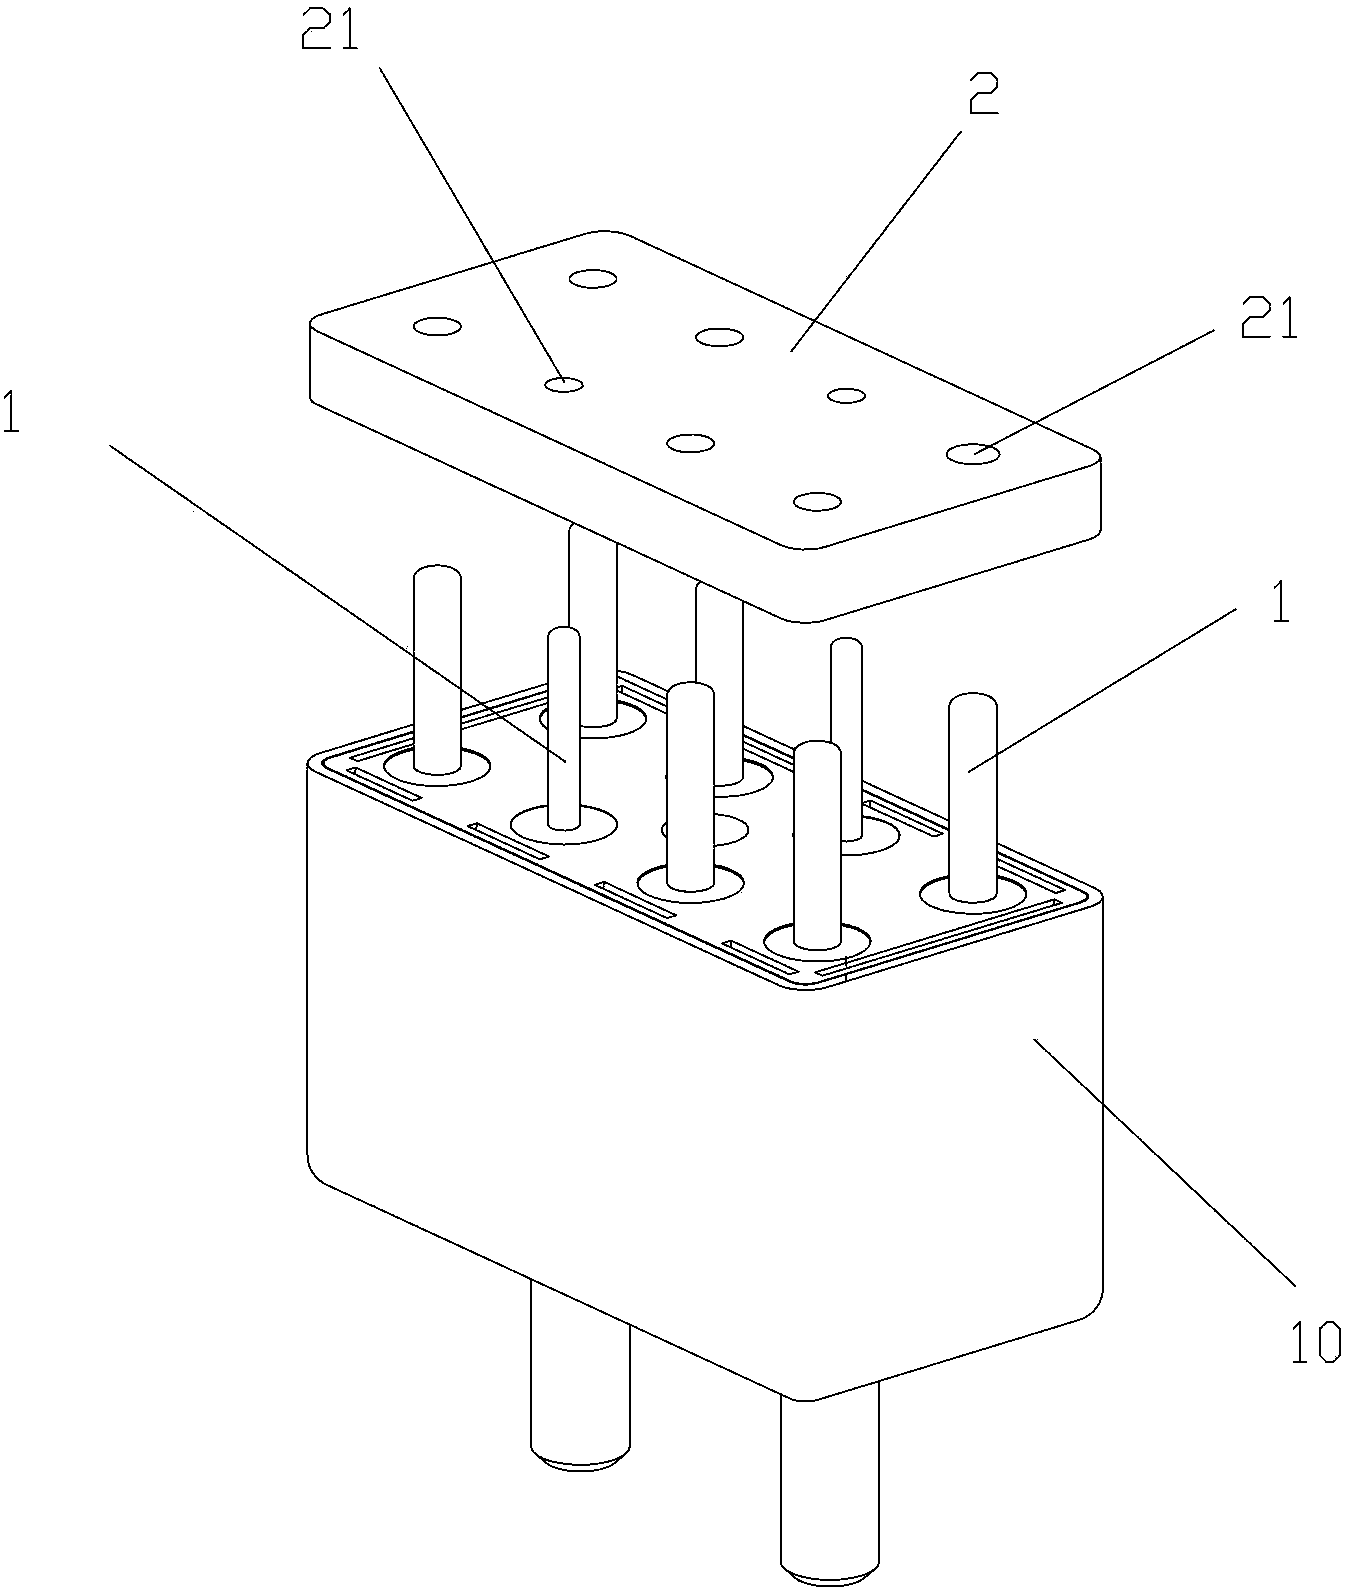 Pin-out structure of relay convenient for installation of complete machine